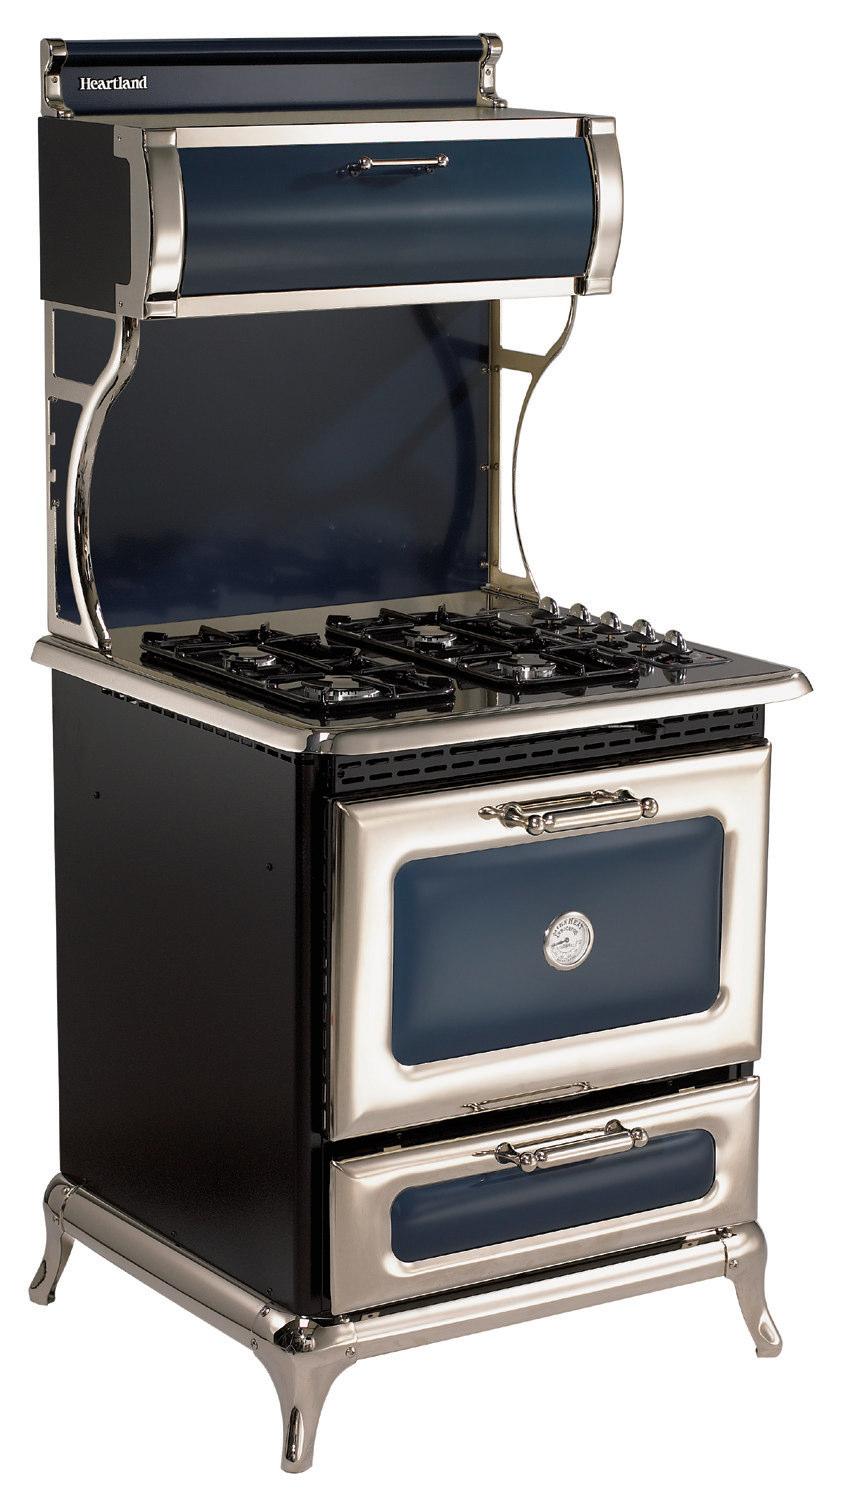 \qrsturvw yrz _rv{q All Gas, All Performance Prepare for an exciting new level of power and precision with our 30 and 48 Classic traditional gas ranges.